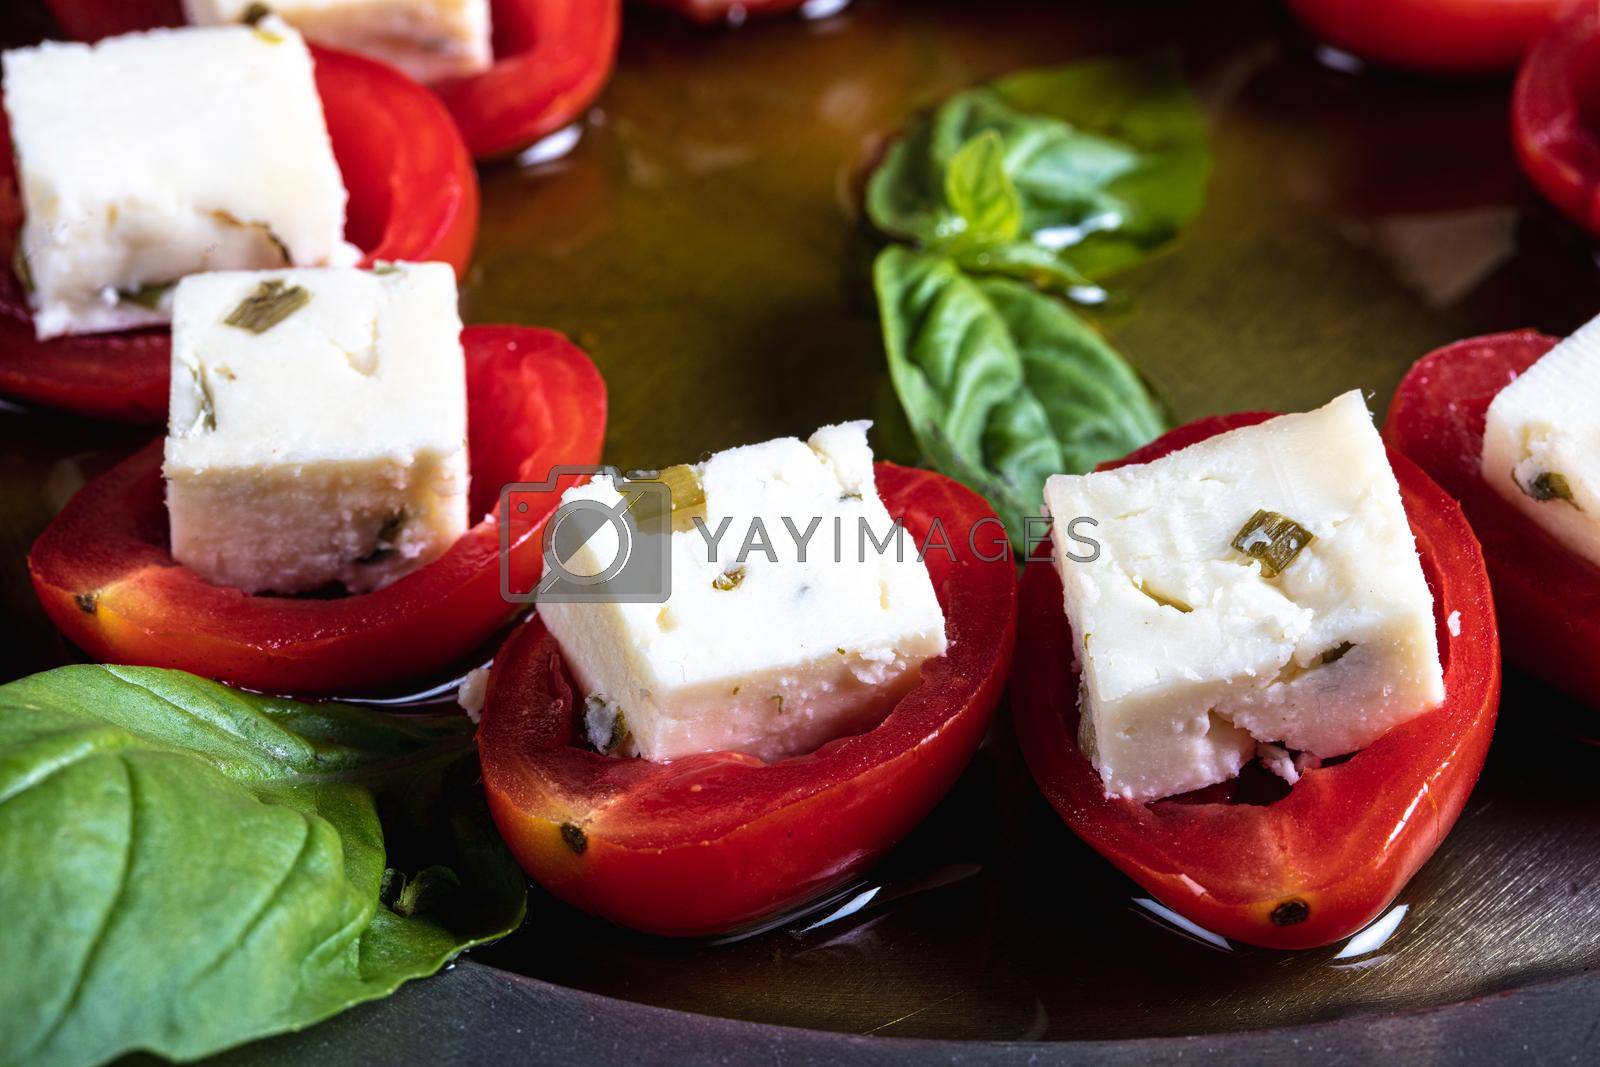 Royalty free image of Stuffed tomatoes with cheese and basil by senkaya